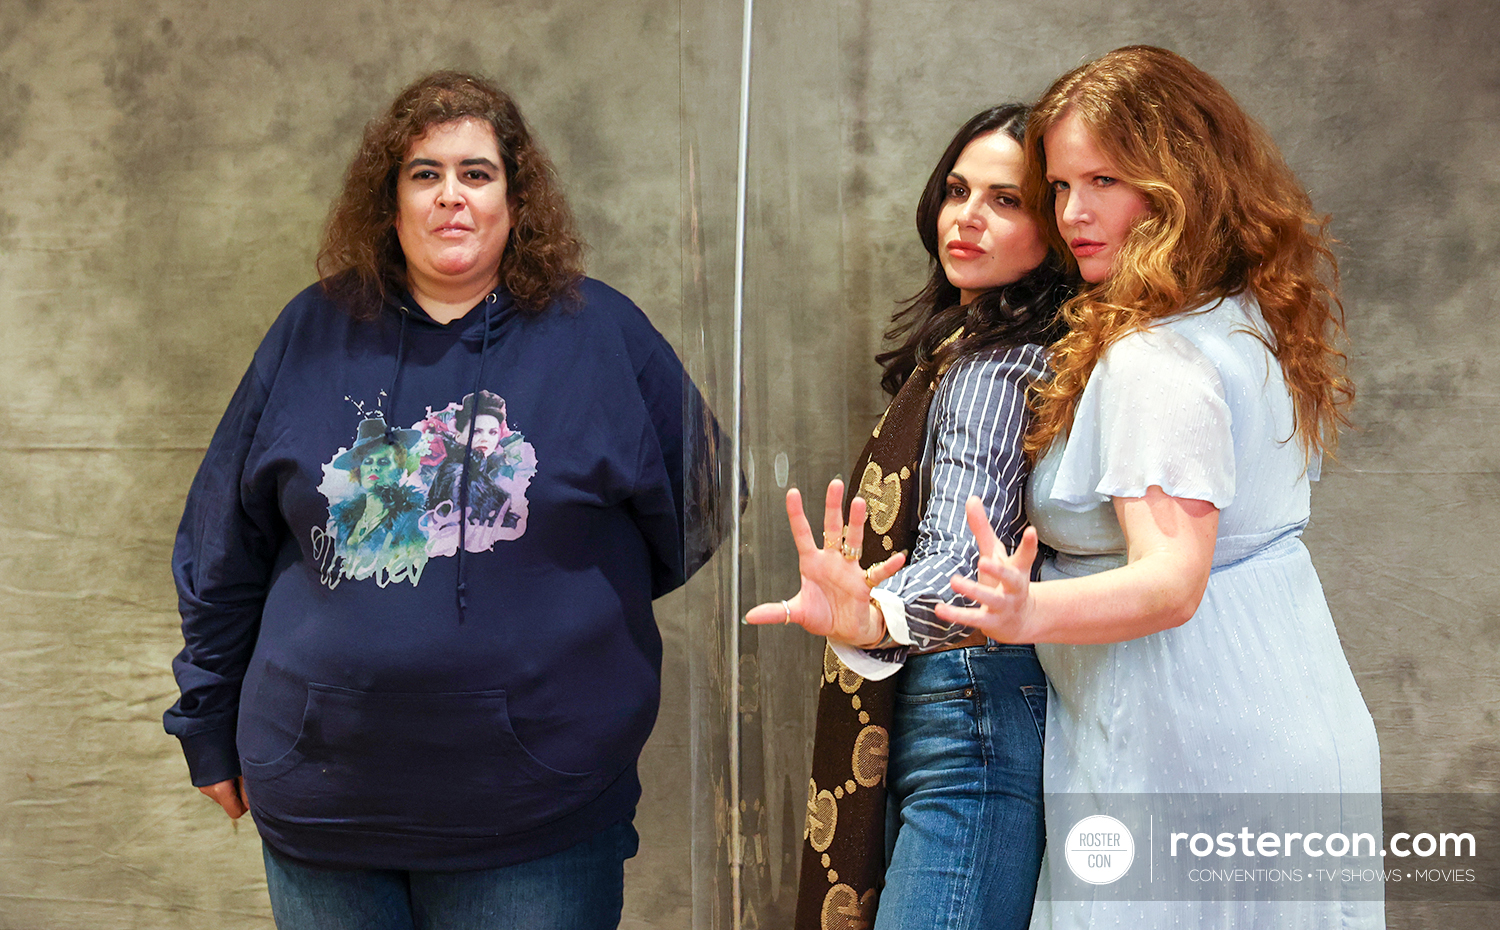 Photoshoot Lana Parilla & Rebecca Mader - Once Upon A Time - The Happy Ending Convention 4